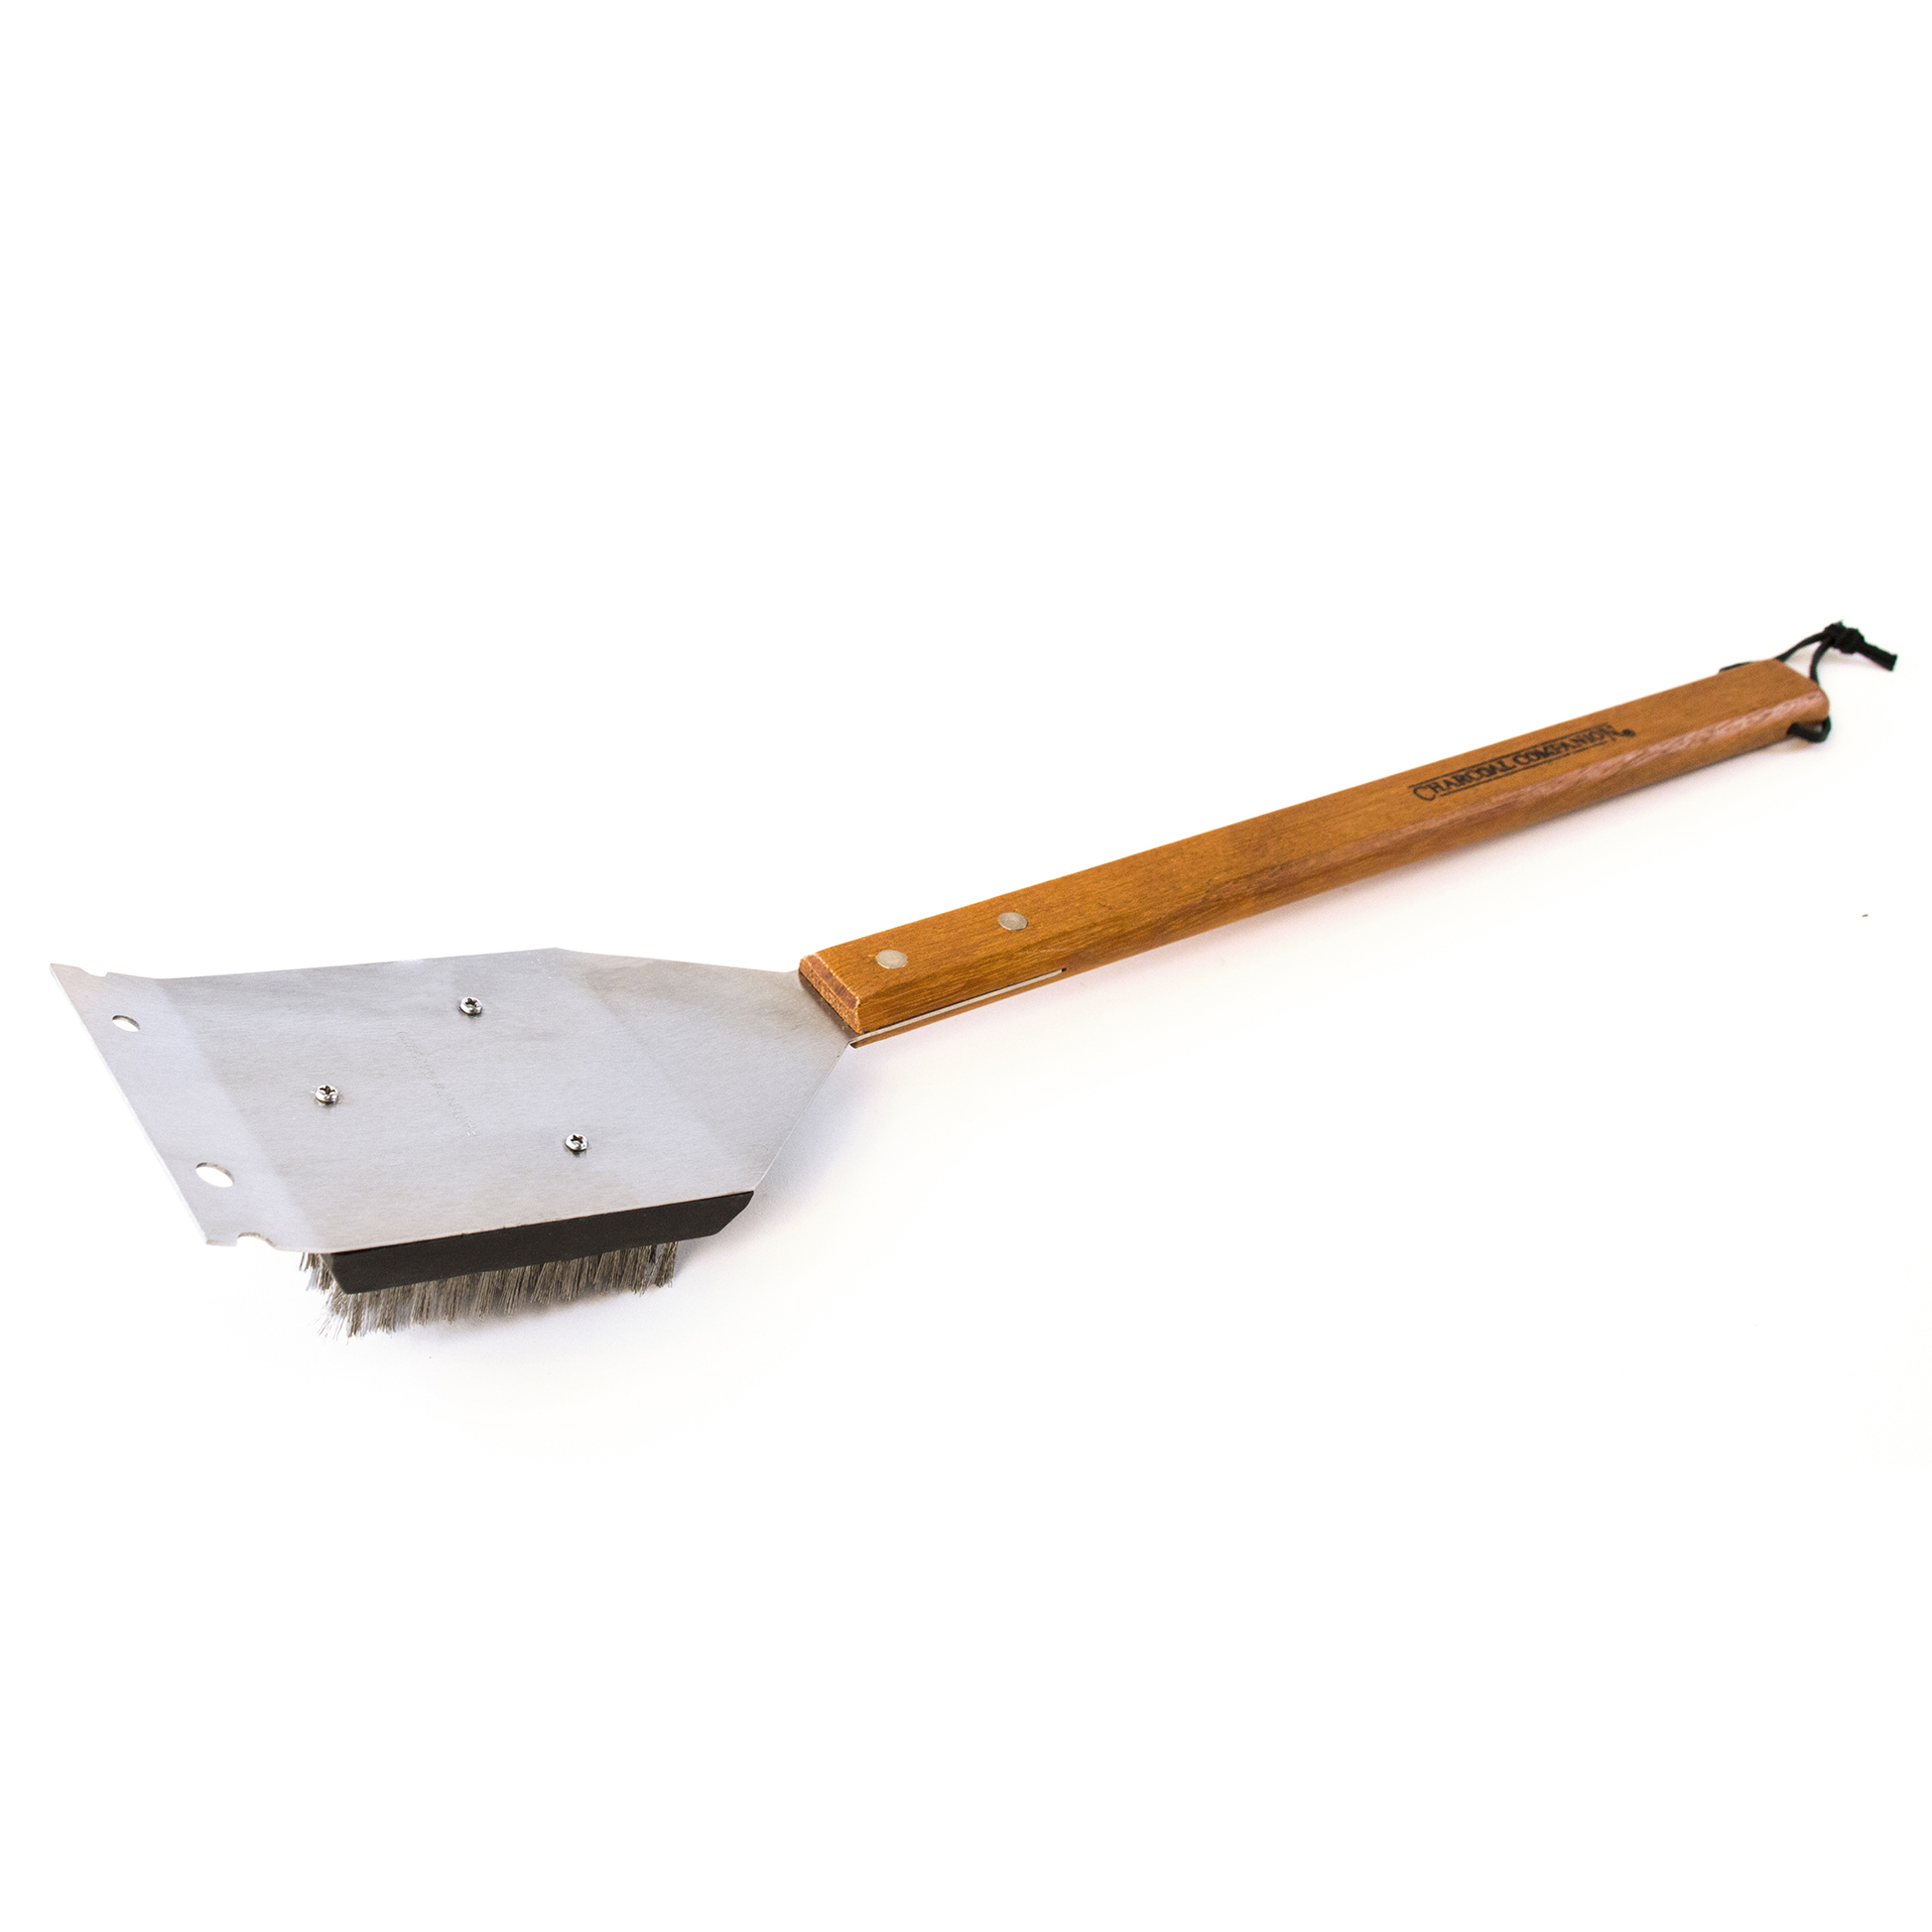 Wooden handle barbecue brush with scraper